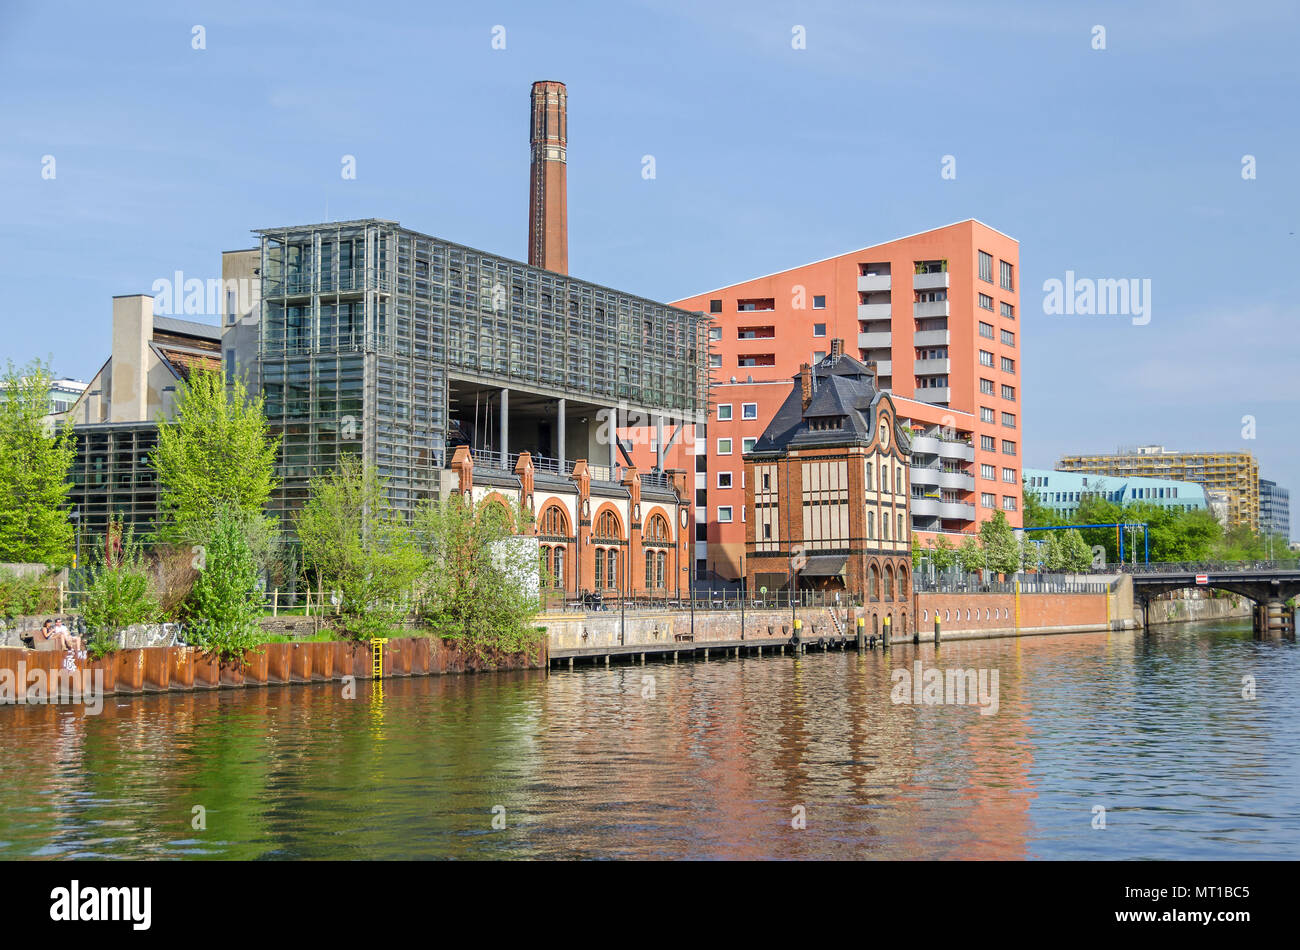 Berlin, Germany - April 22, 2018: Radialsystem V, a cultural and event center, with its red brick building of the machine hall of the pumping station Stock Photo